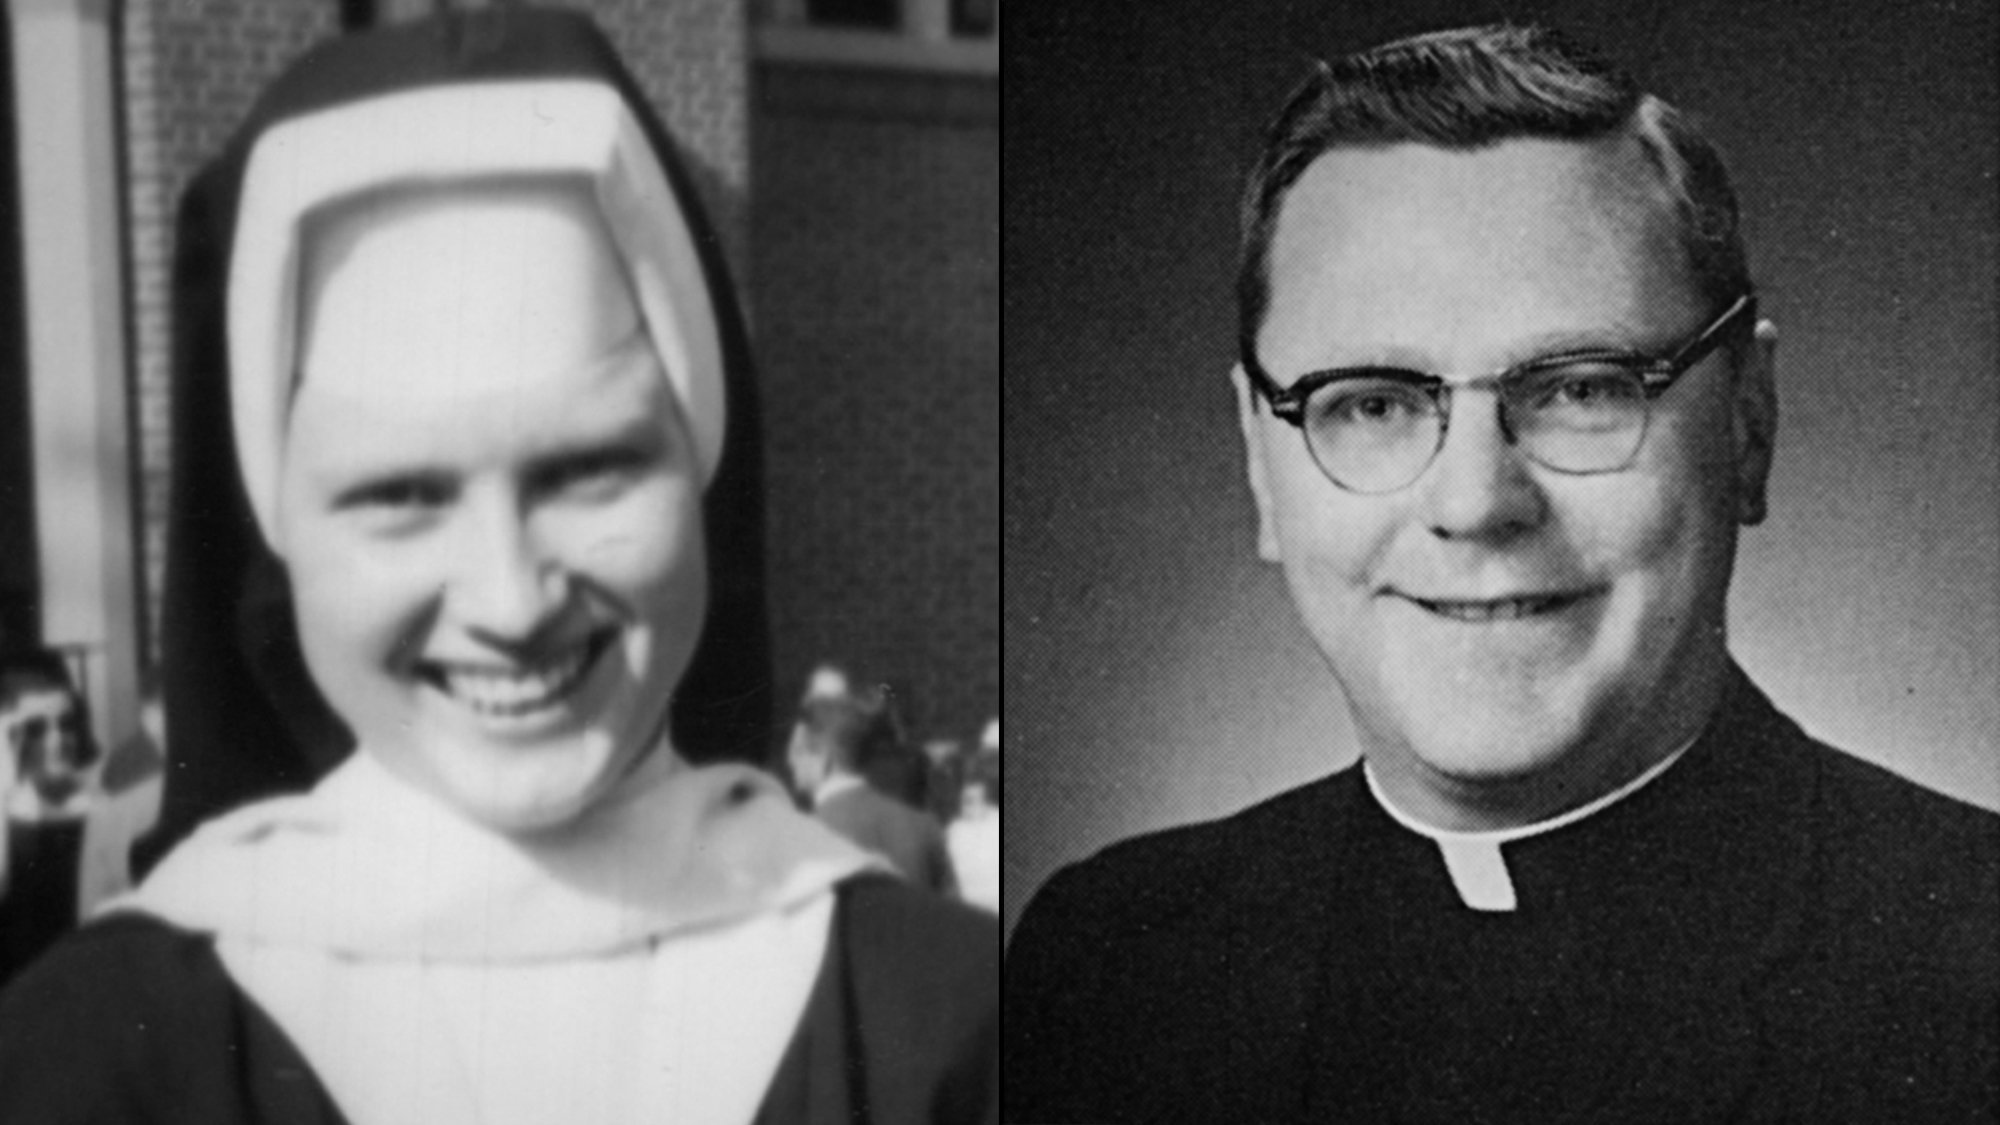 DNA From Exhumed Body of Priest Could Solve ColdCase Murder of Nun